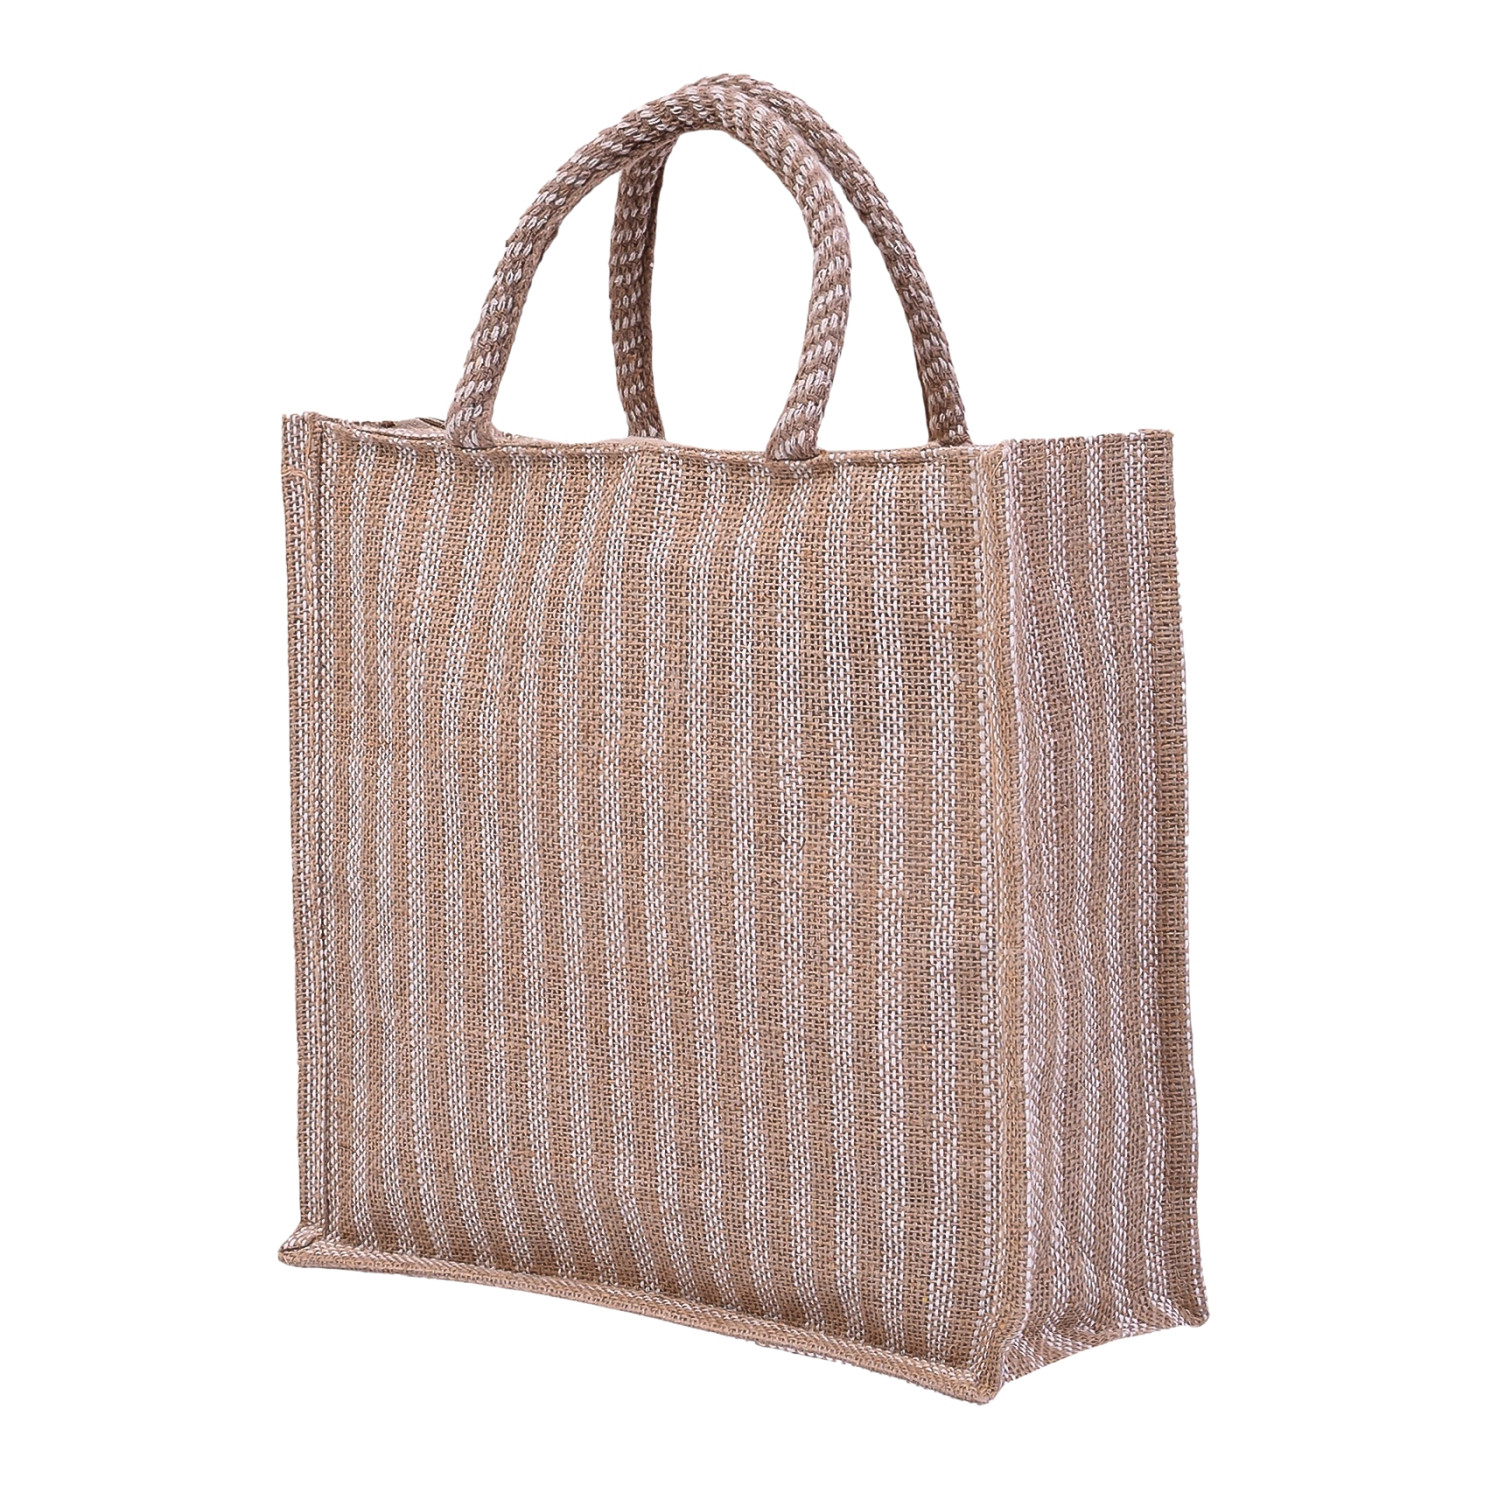 Kuber Industries Grocery Bag | Jute Carry Bag | Lunch Bags for Office | Zipper Grocery Bag with Handle | Vegetable Bag | Lining Front Pocket Shopping Bag | Medium | Brown